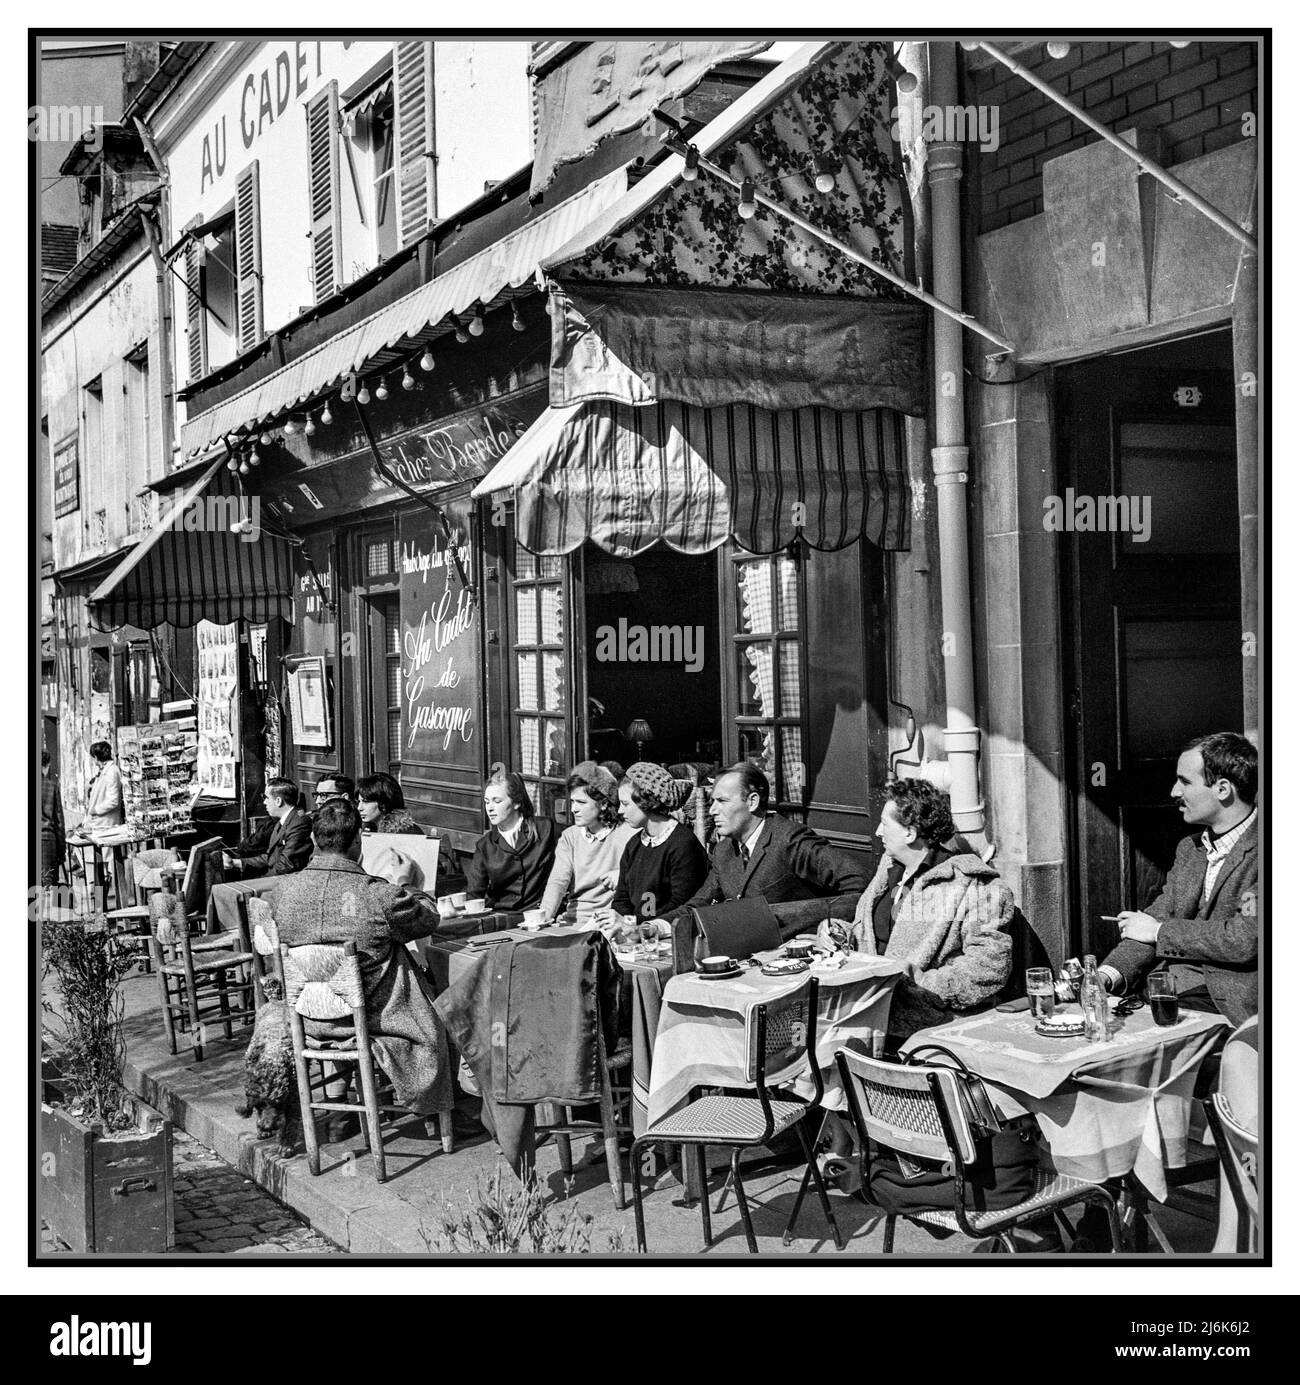 1960s Paris Montmartre Cafe Restaurant terrace alfresco with drinkers and diners seated at tables. Street artist drawing a portrait at table  Place du Tertre Montmartre Paris France  1965 Willem van de Poll Photographer Stock Photo